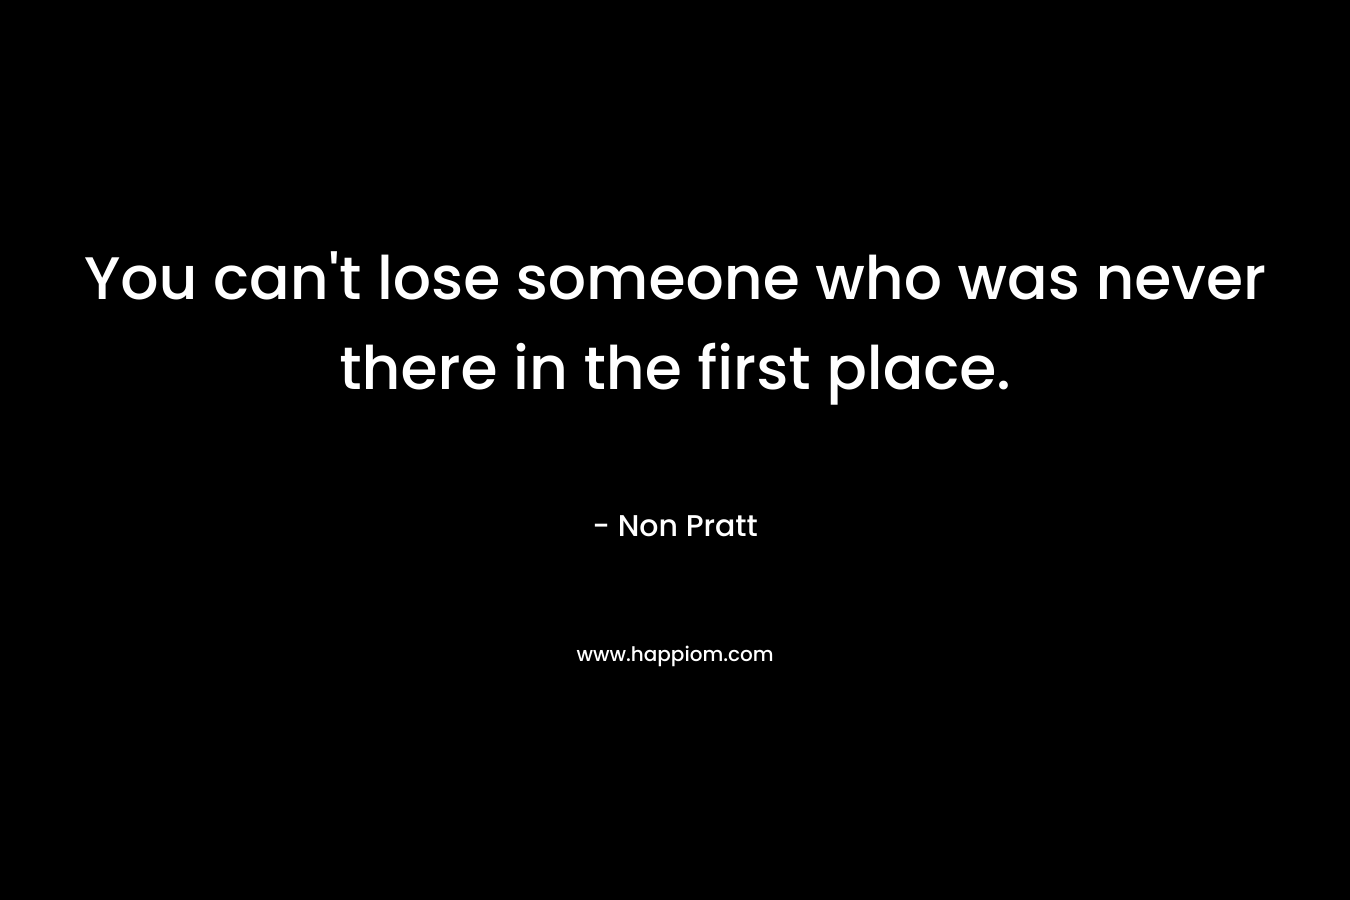 You can't lose someone who was never there in the first place.